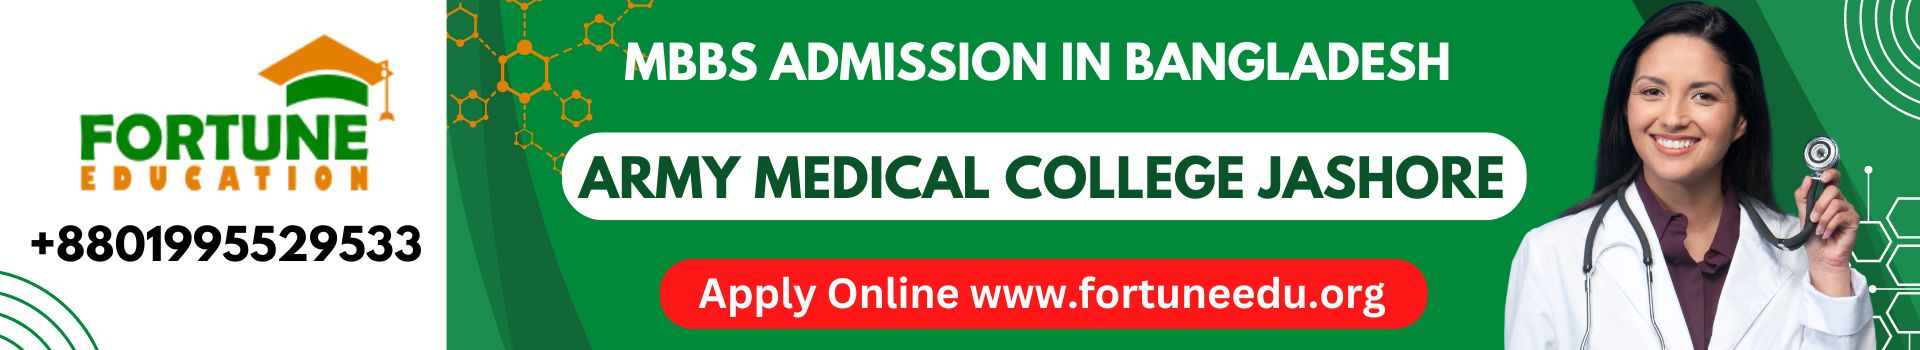 Army Medical College Jashore Ad Banner